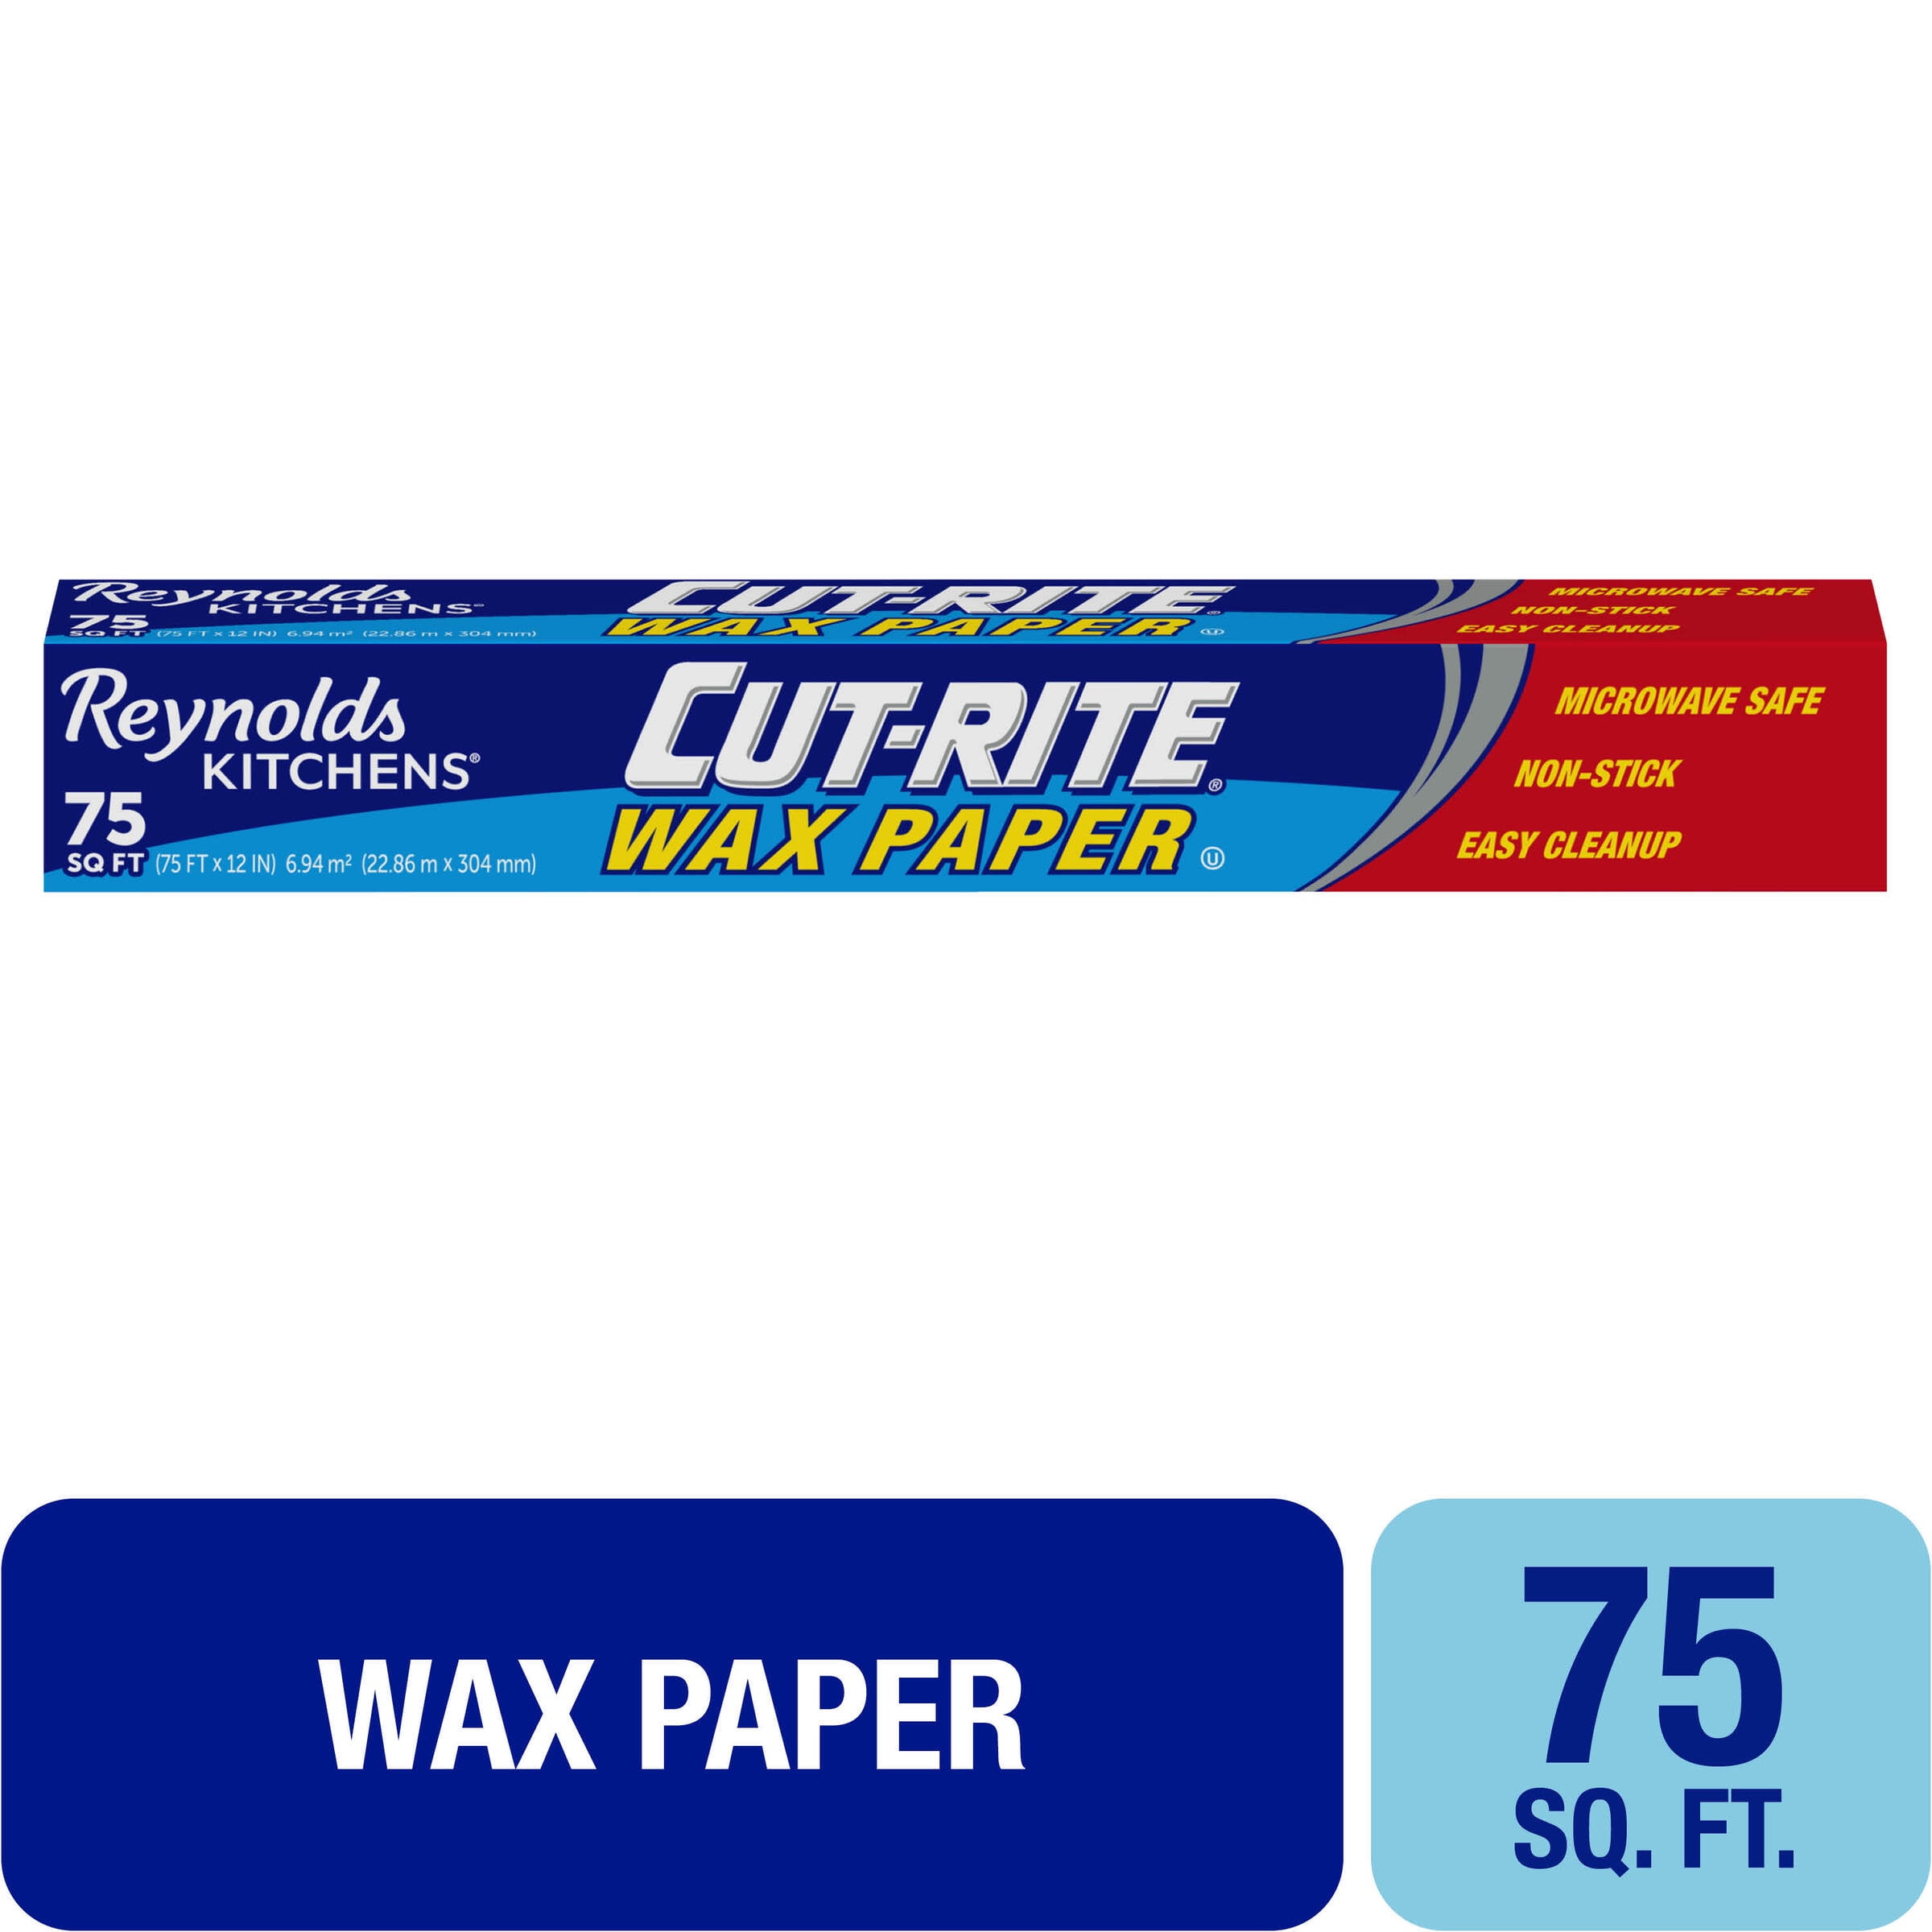 Reynolds Wax Paper shot closeup that's bright and colorful on a